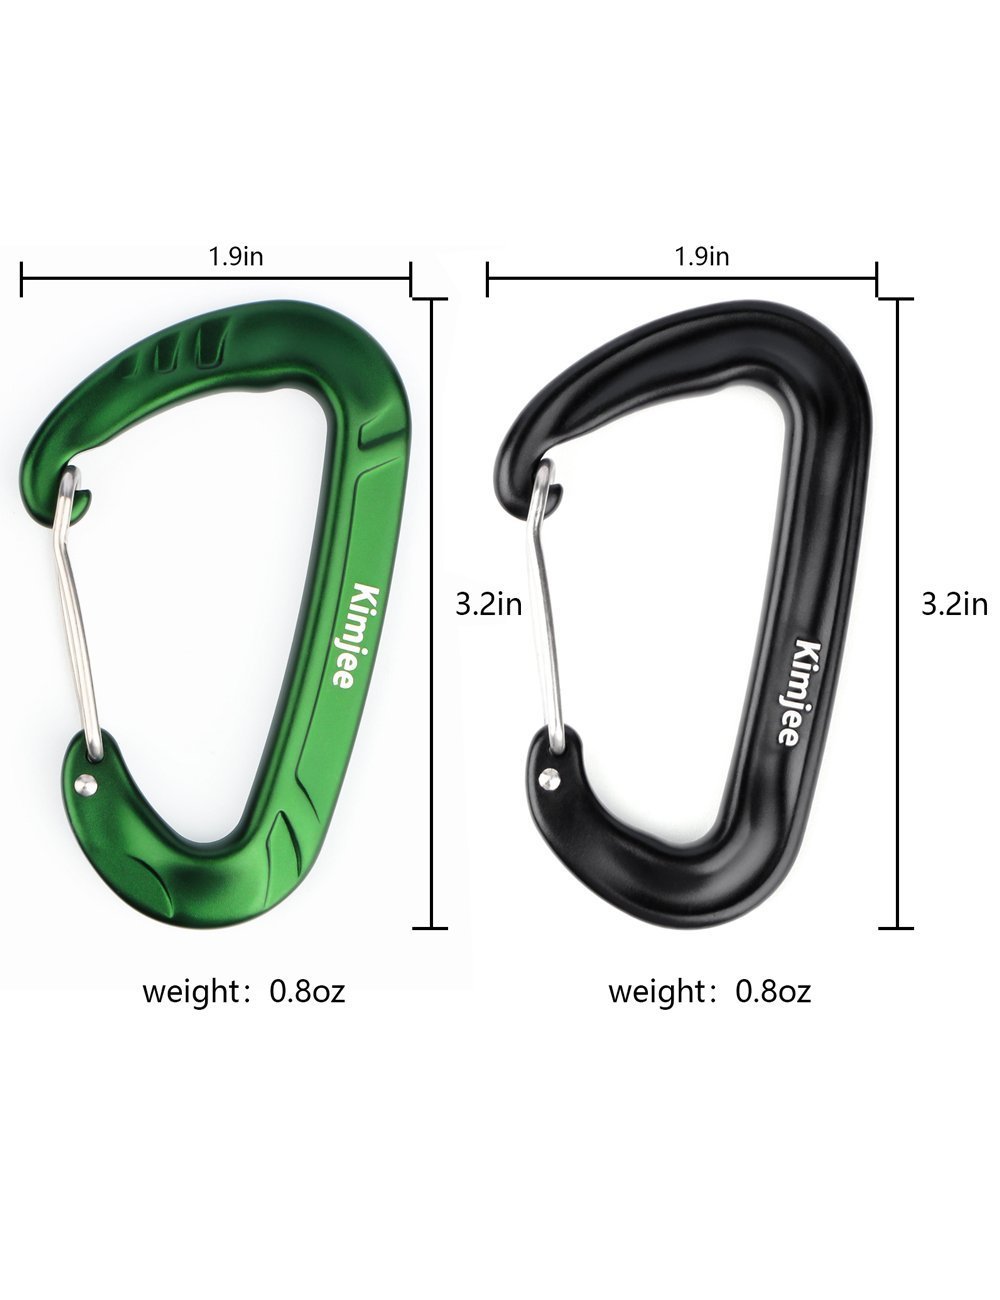 Buy now kimjee 12kn wire gate carabiners d shape aircraft grade aluminum clip for keychain hammocks camping hiking backpack dog leash green black 5